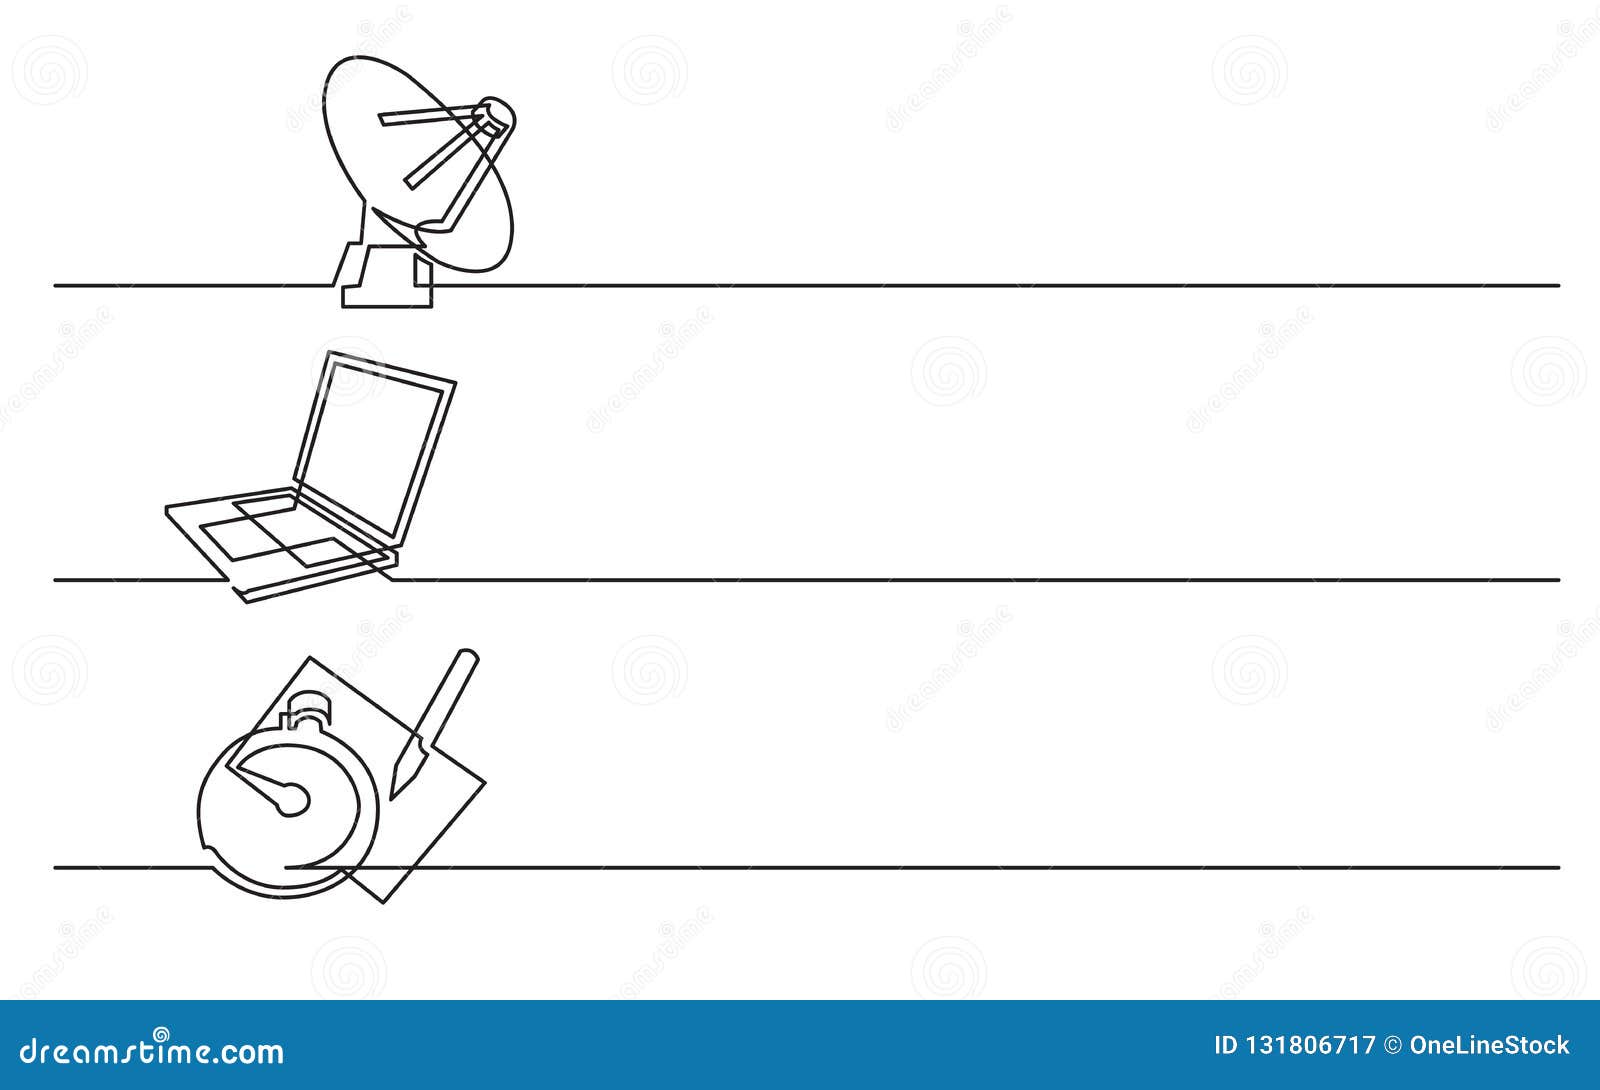 banner  - continuous line drawing of business icons: satelite antena, laptop computer, stop watch